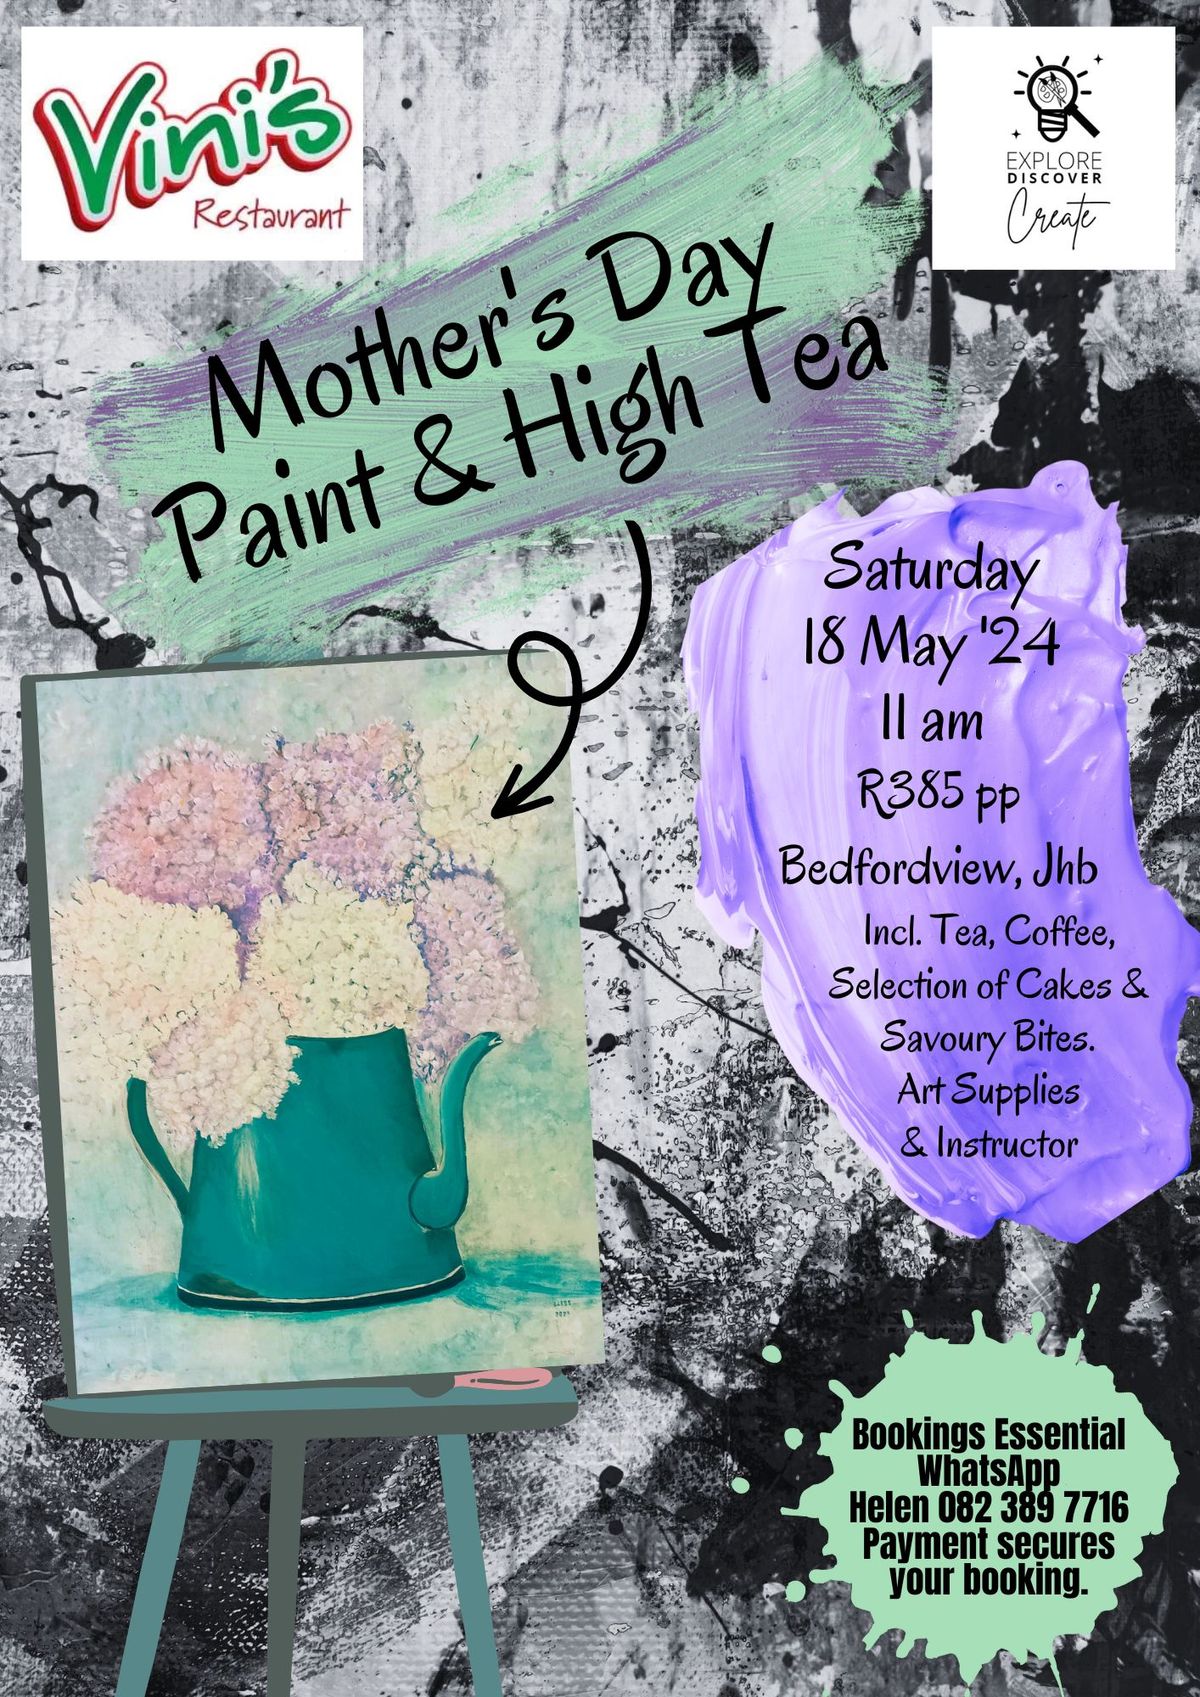 Mother's Day Edition Paint & High Tea